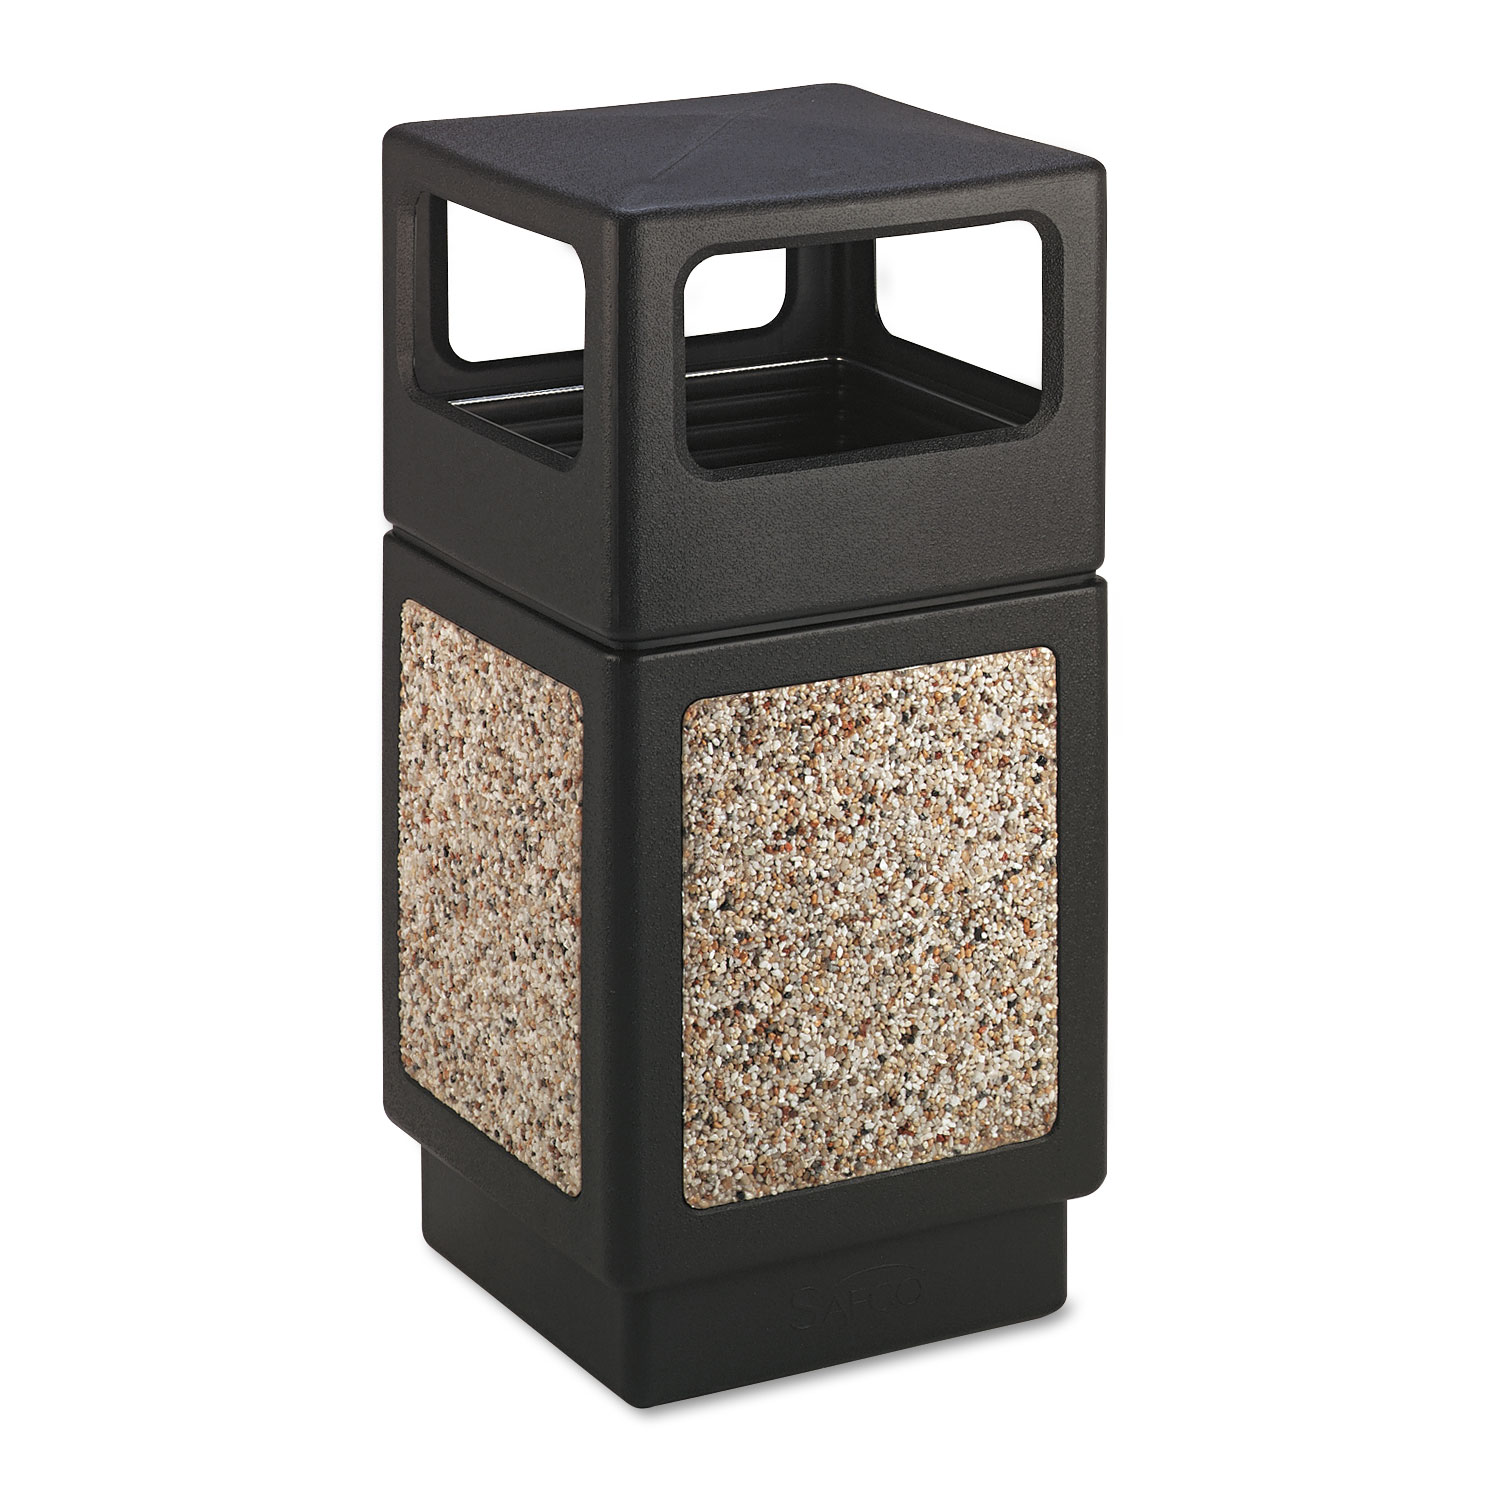  Safco 9472NC Canmeleon Side-Open Receptacle, Square, Aggregate/Polyethylene, 38 gal, Black (SAF9472NC) 